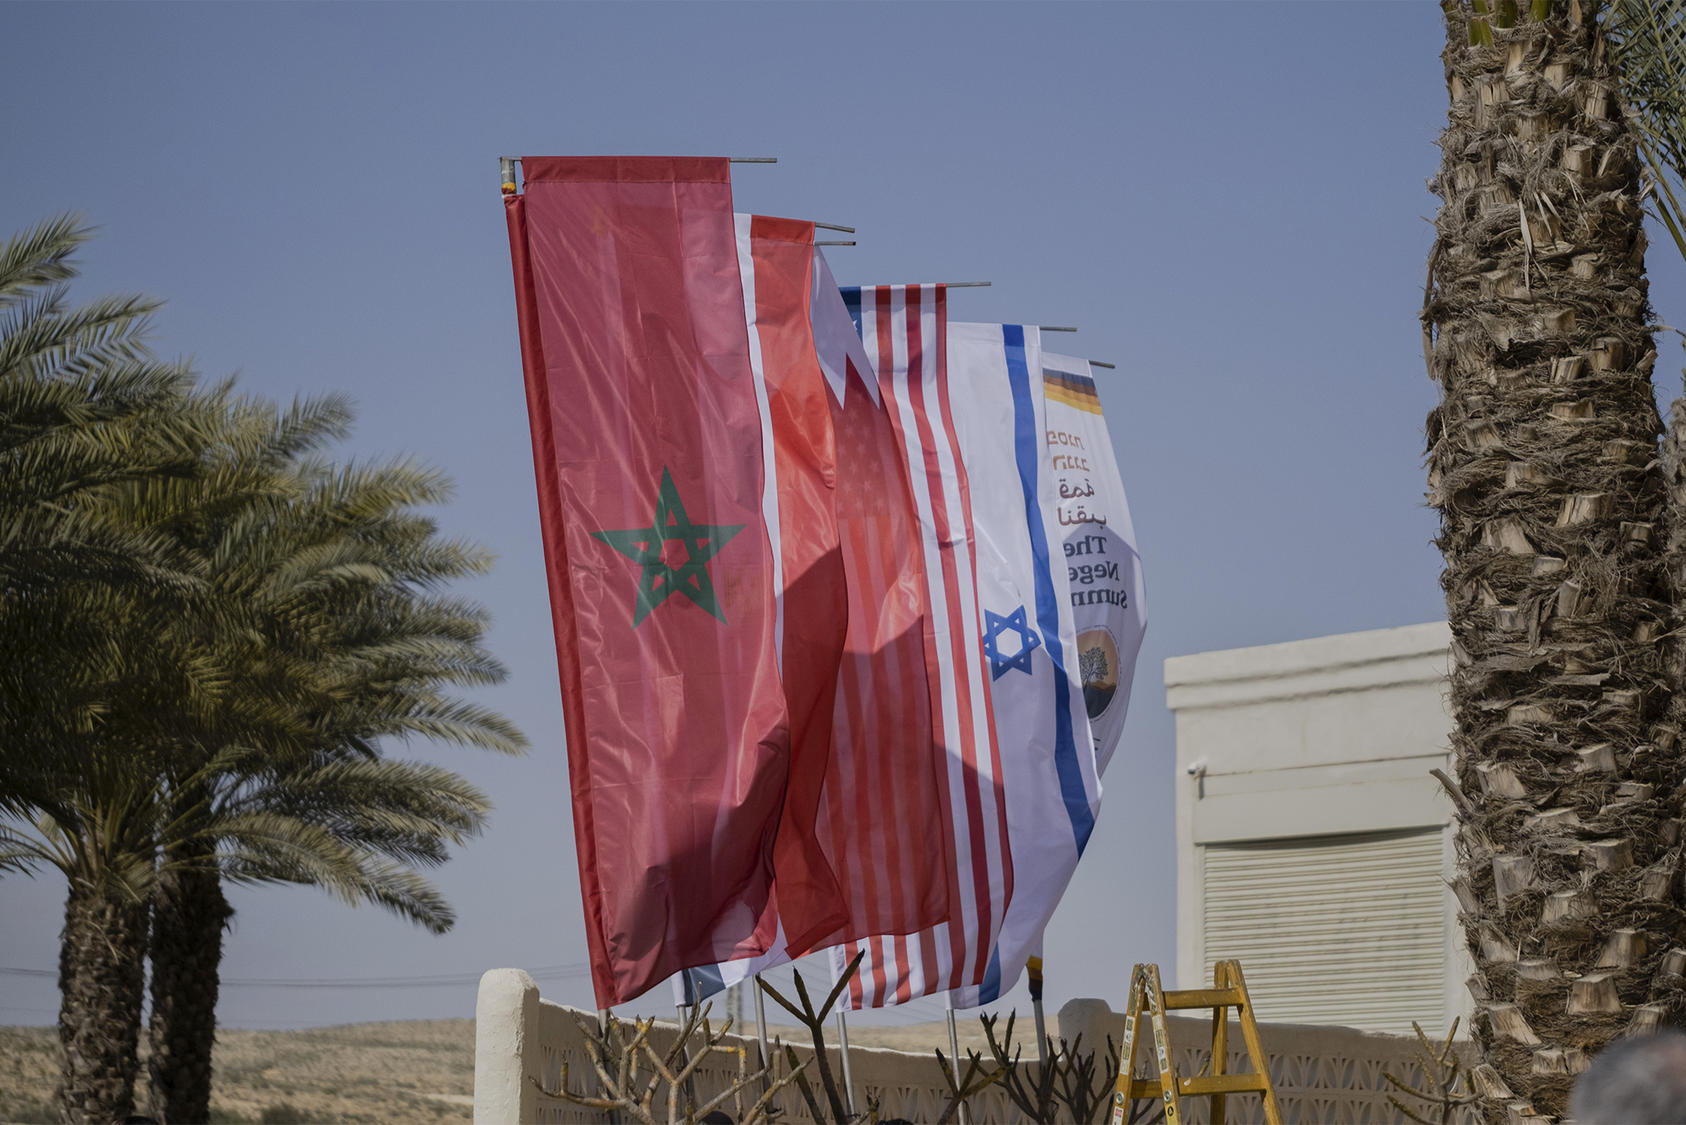 Flags of countries, including Morocco at front, participating in a summit in Sde Boker, Israel. March 27, 2022. (Amit Elkayam/The New York Times)